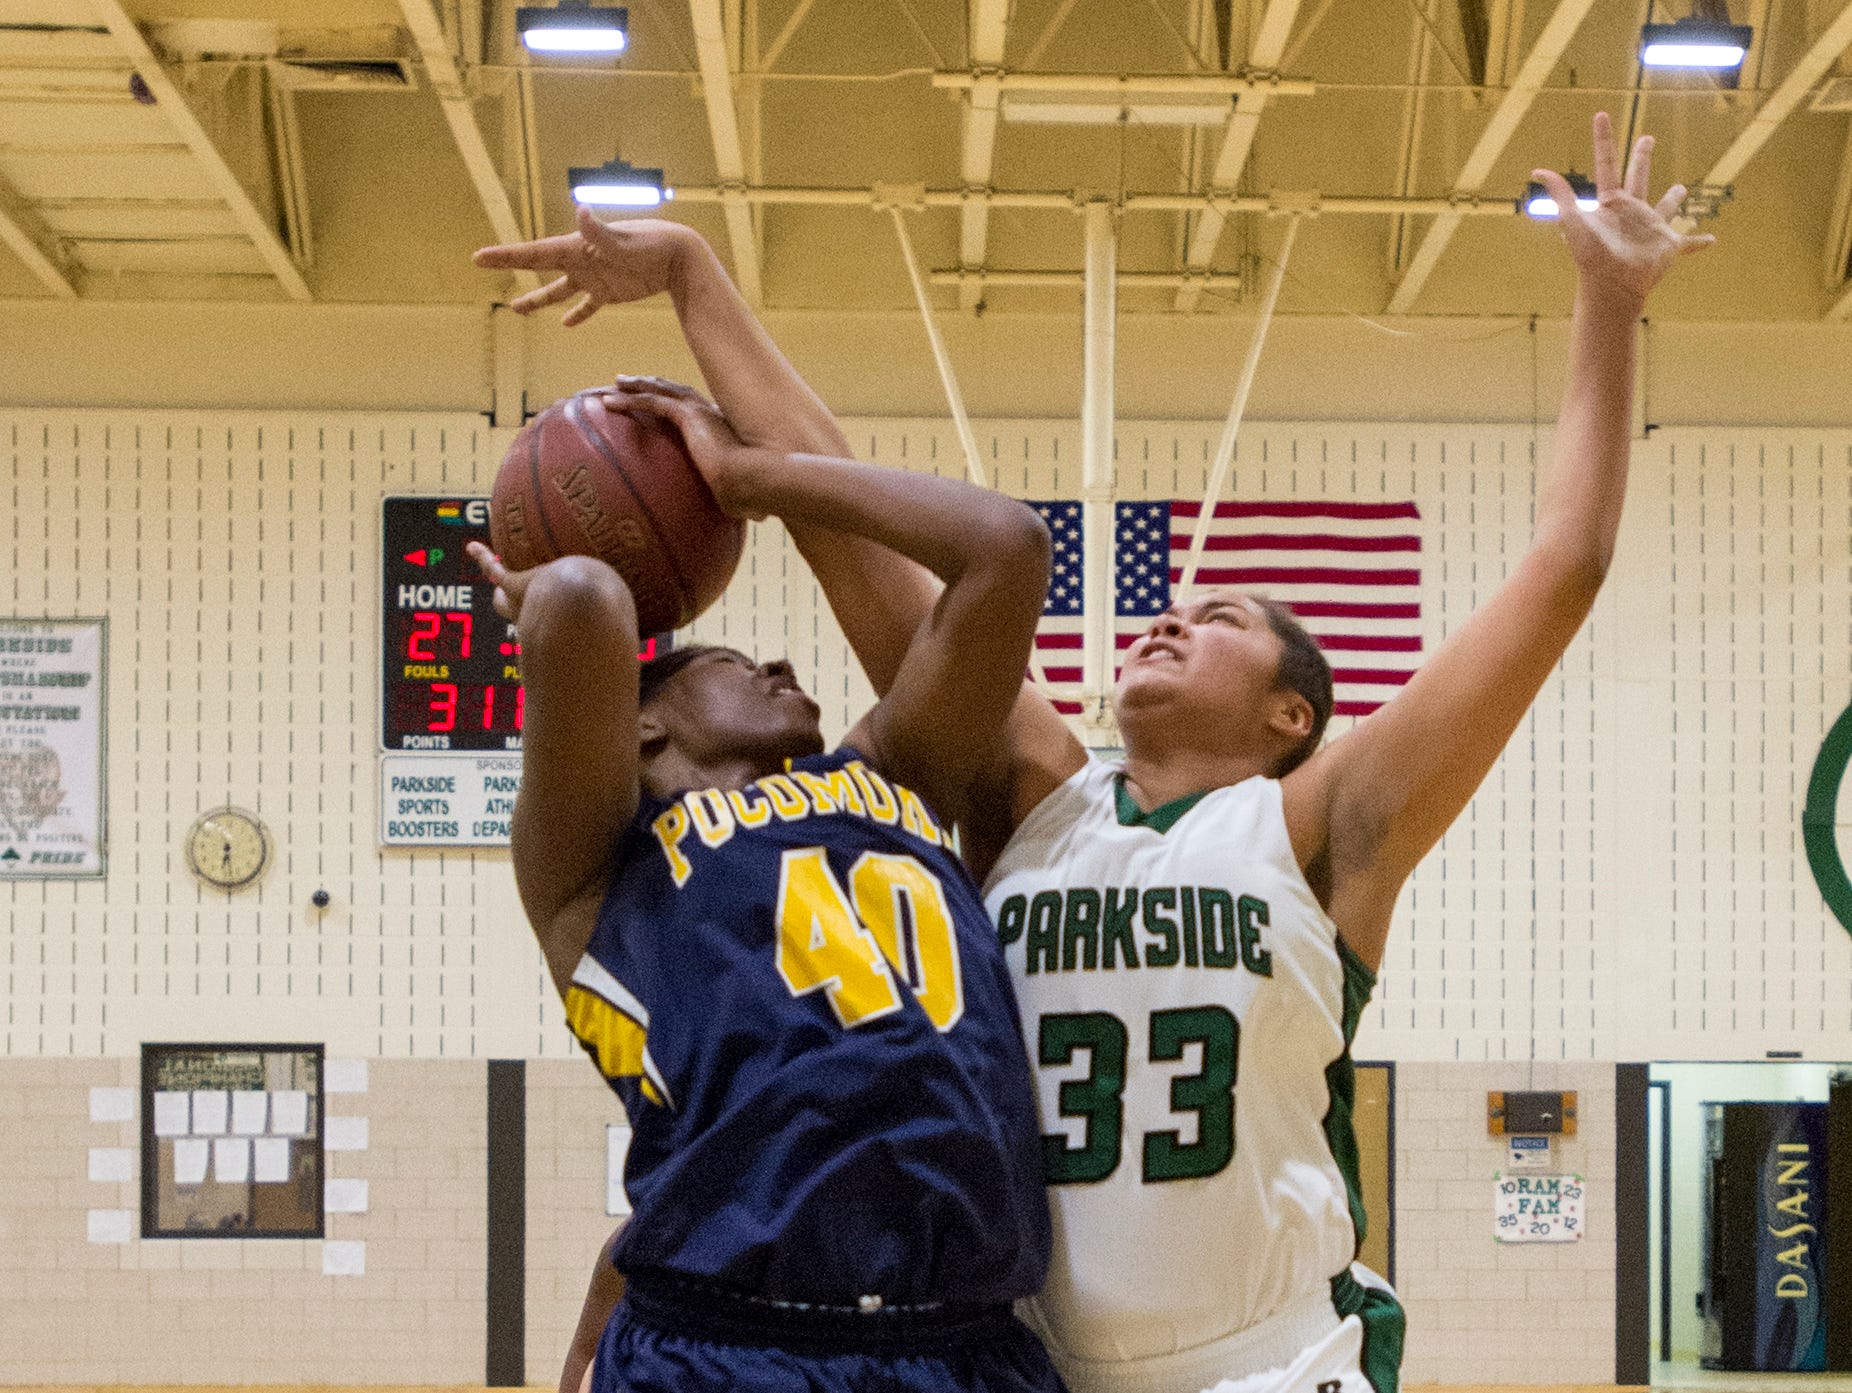 Parkside's Kayla Handy (33) was named the female athlete of the week for the period of Jan. 19-Jan. 24.